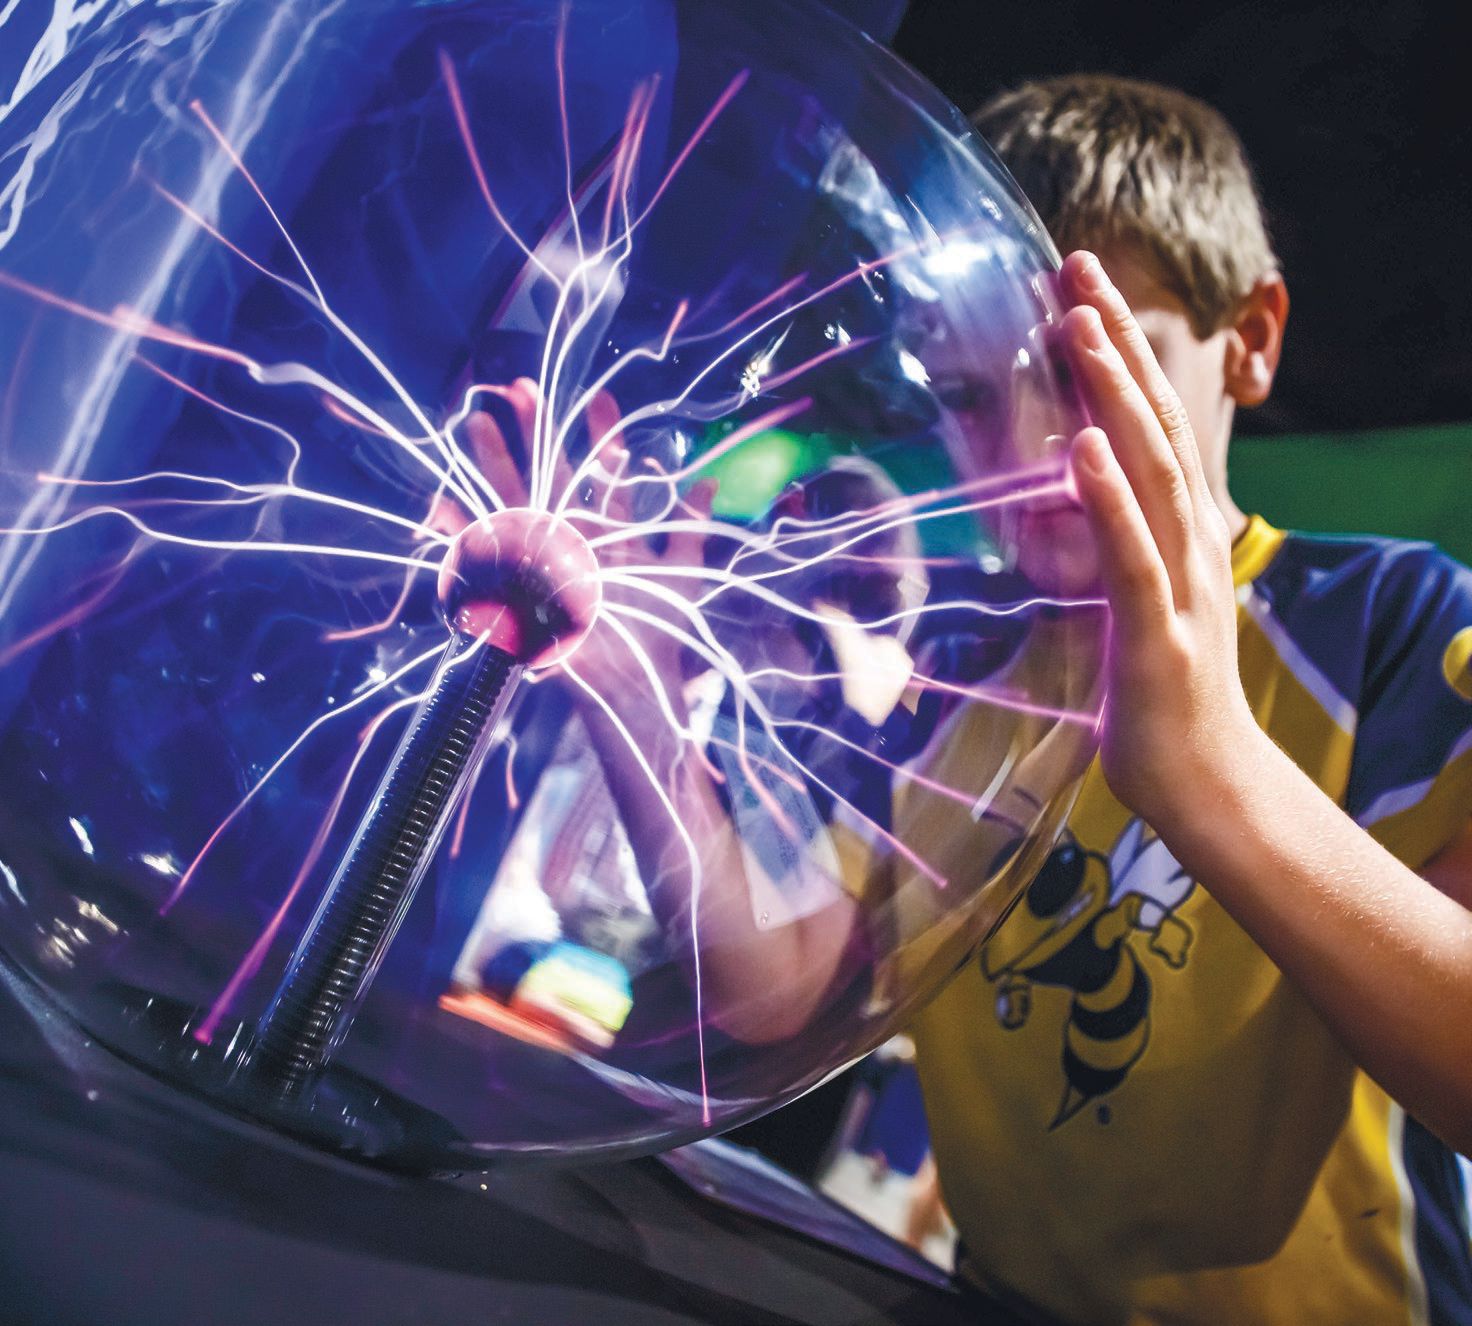 Explore combustion, aerodynamics, plate tectonics and more in the Fantastic Forces STEM exhibit at Fernbank PHOTO: COURTESY OF FERNBANK